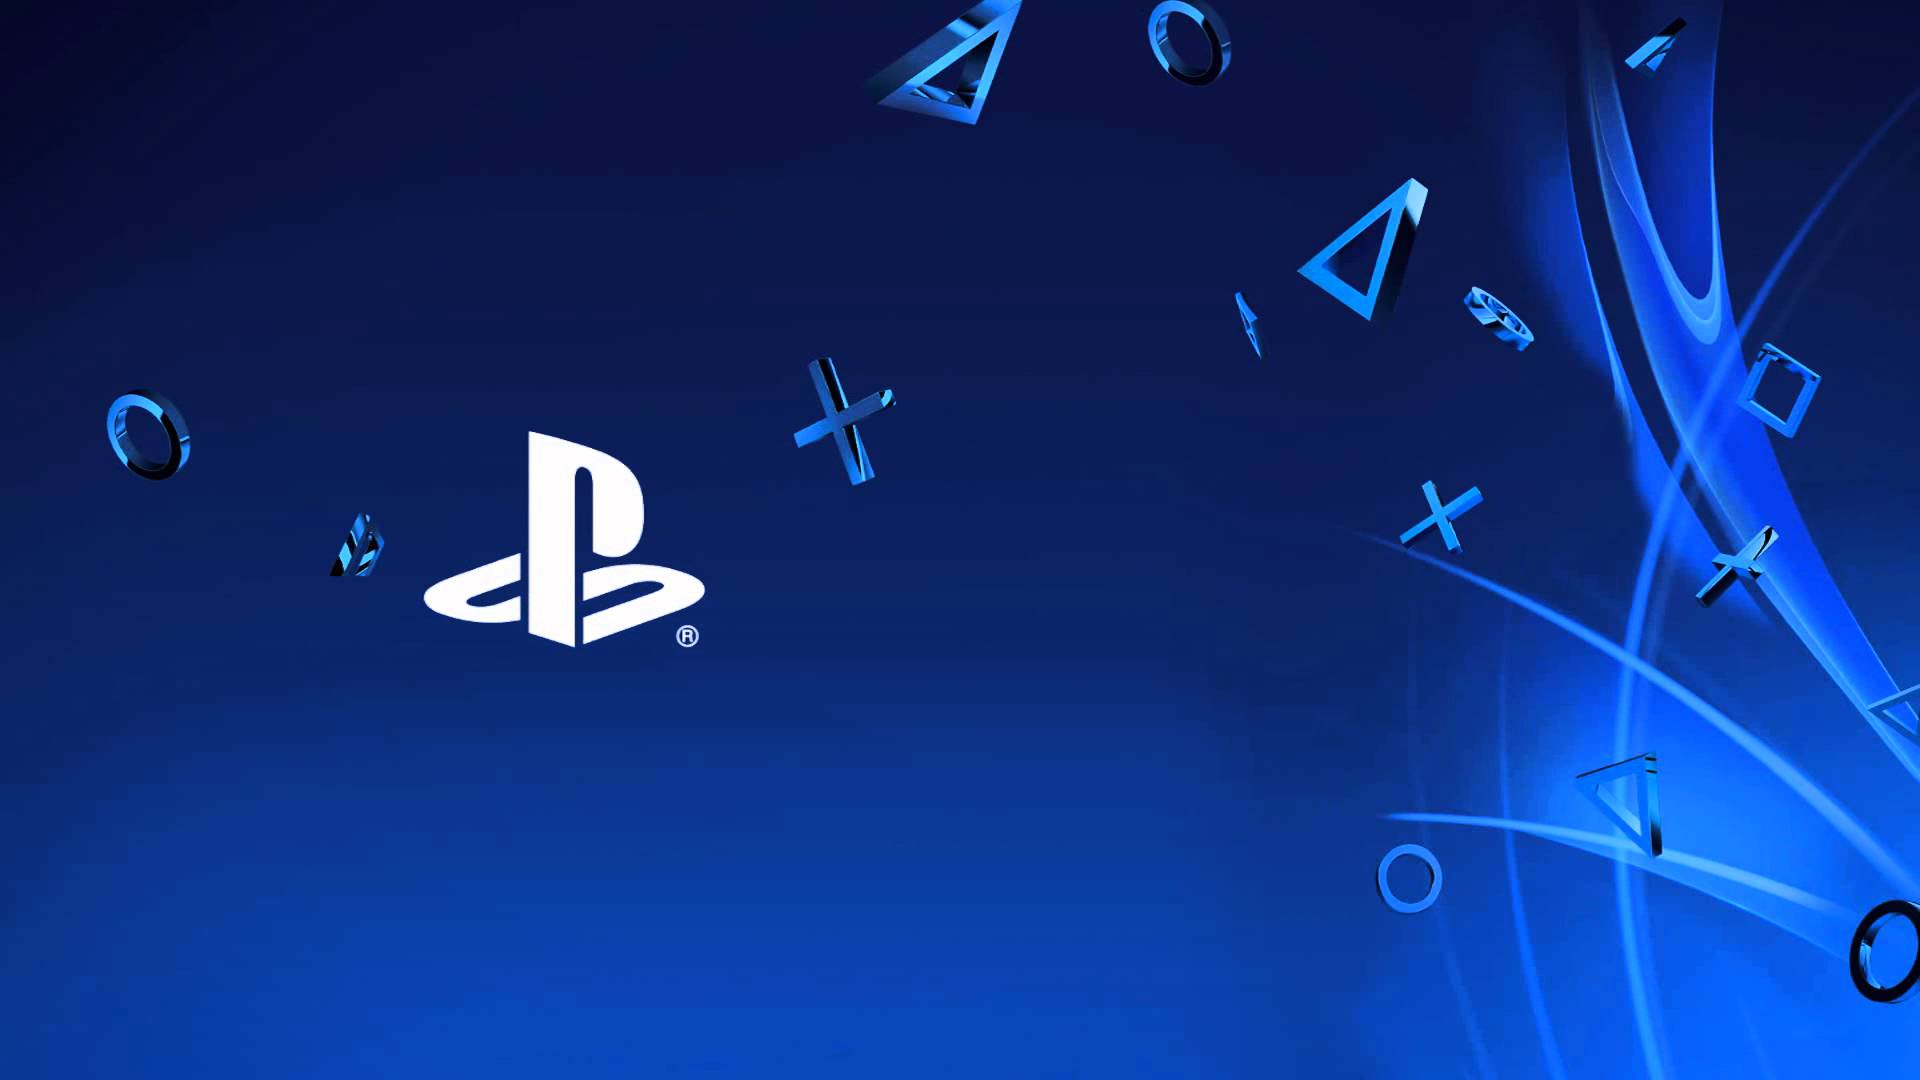 Here are some Black Friday deals for PlayStation 4 games | GodisaGeek.com